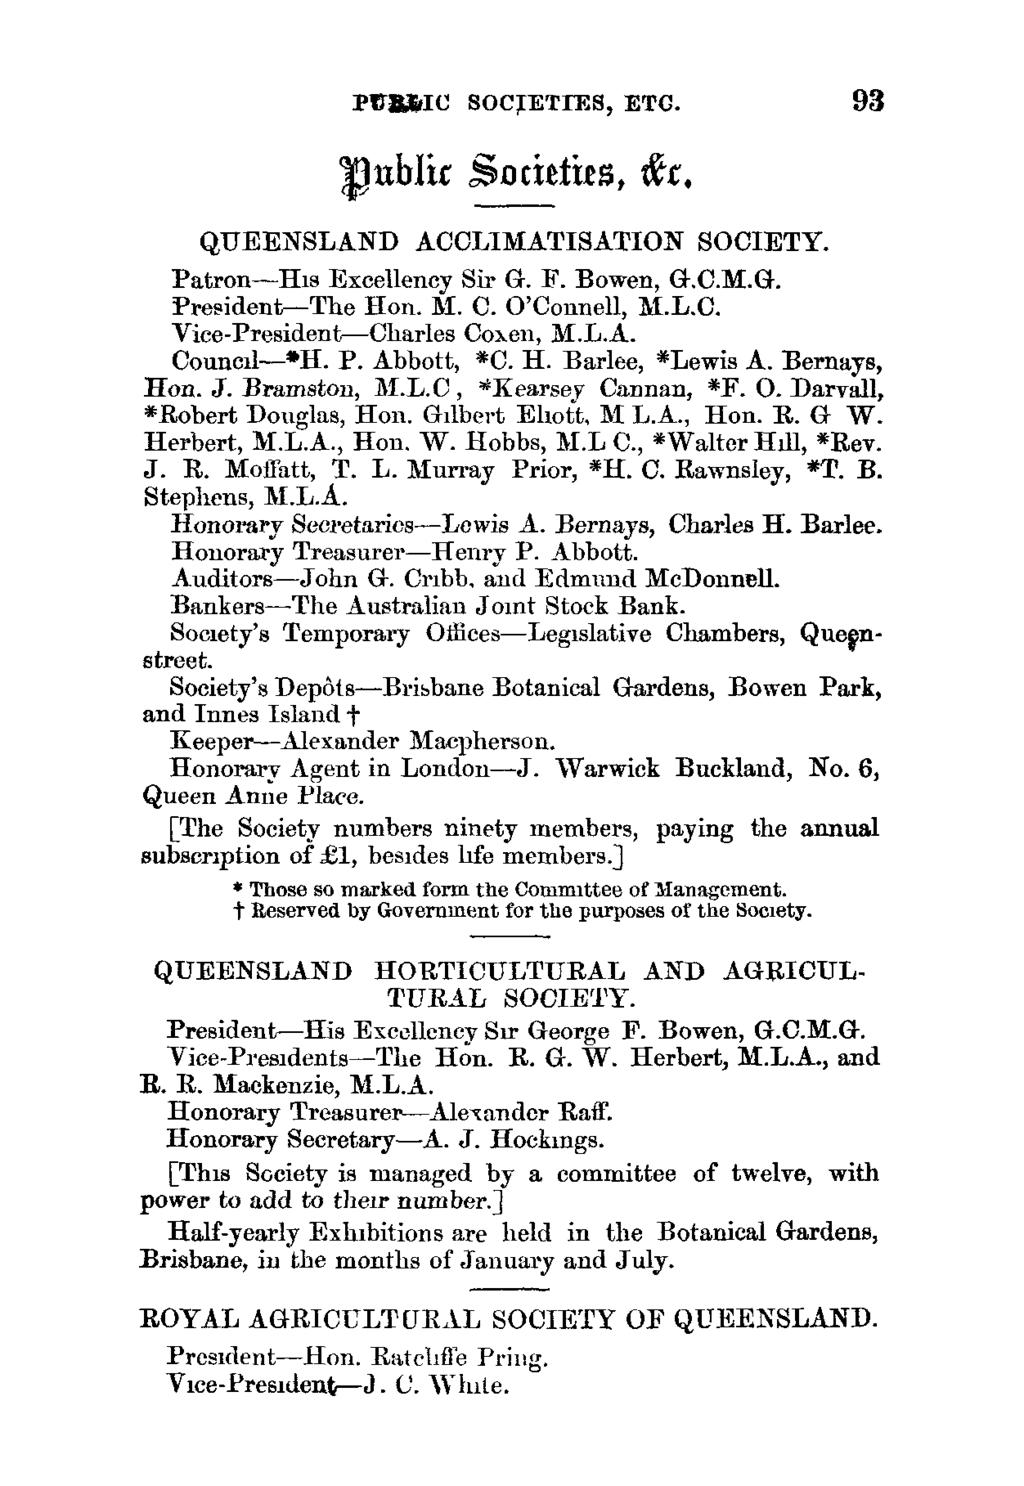 PVZAIC SOCJETIES, ETC. 93 ub1ic %ACttfYc$, t C, QUEENSLAND ACCLIMATISATION SOCIETY. Patron-His Excellency Sir G. IF. Bowen, G.C.M.G. President-The Hon. Al. C. O'Connell, M.L.C. Vice-President-Charles Coxeii, M.